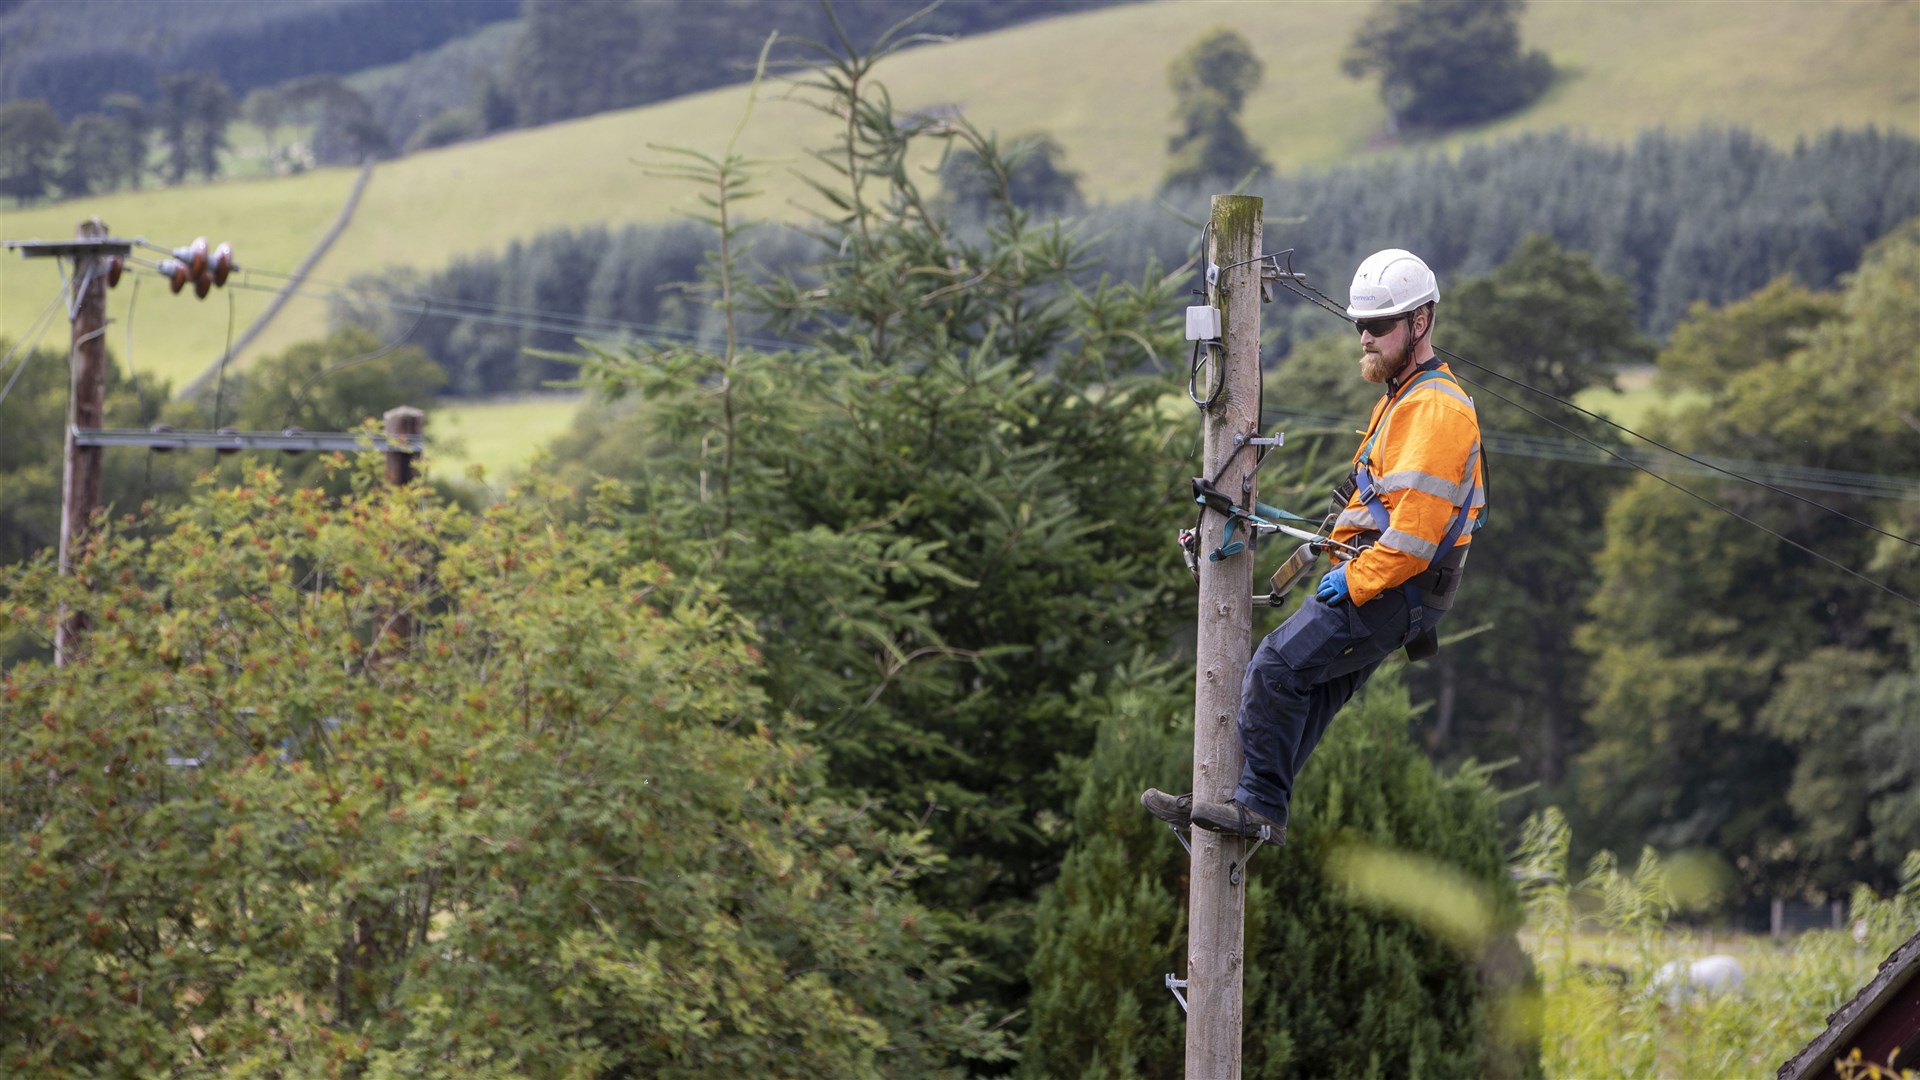 Openreach wants to bring ultrafast broadband to Carrbridge but needs support from the local community.